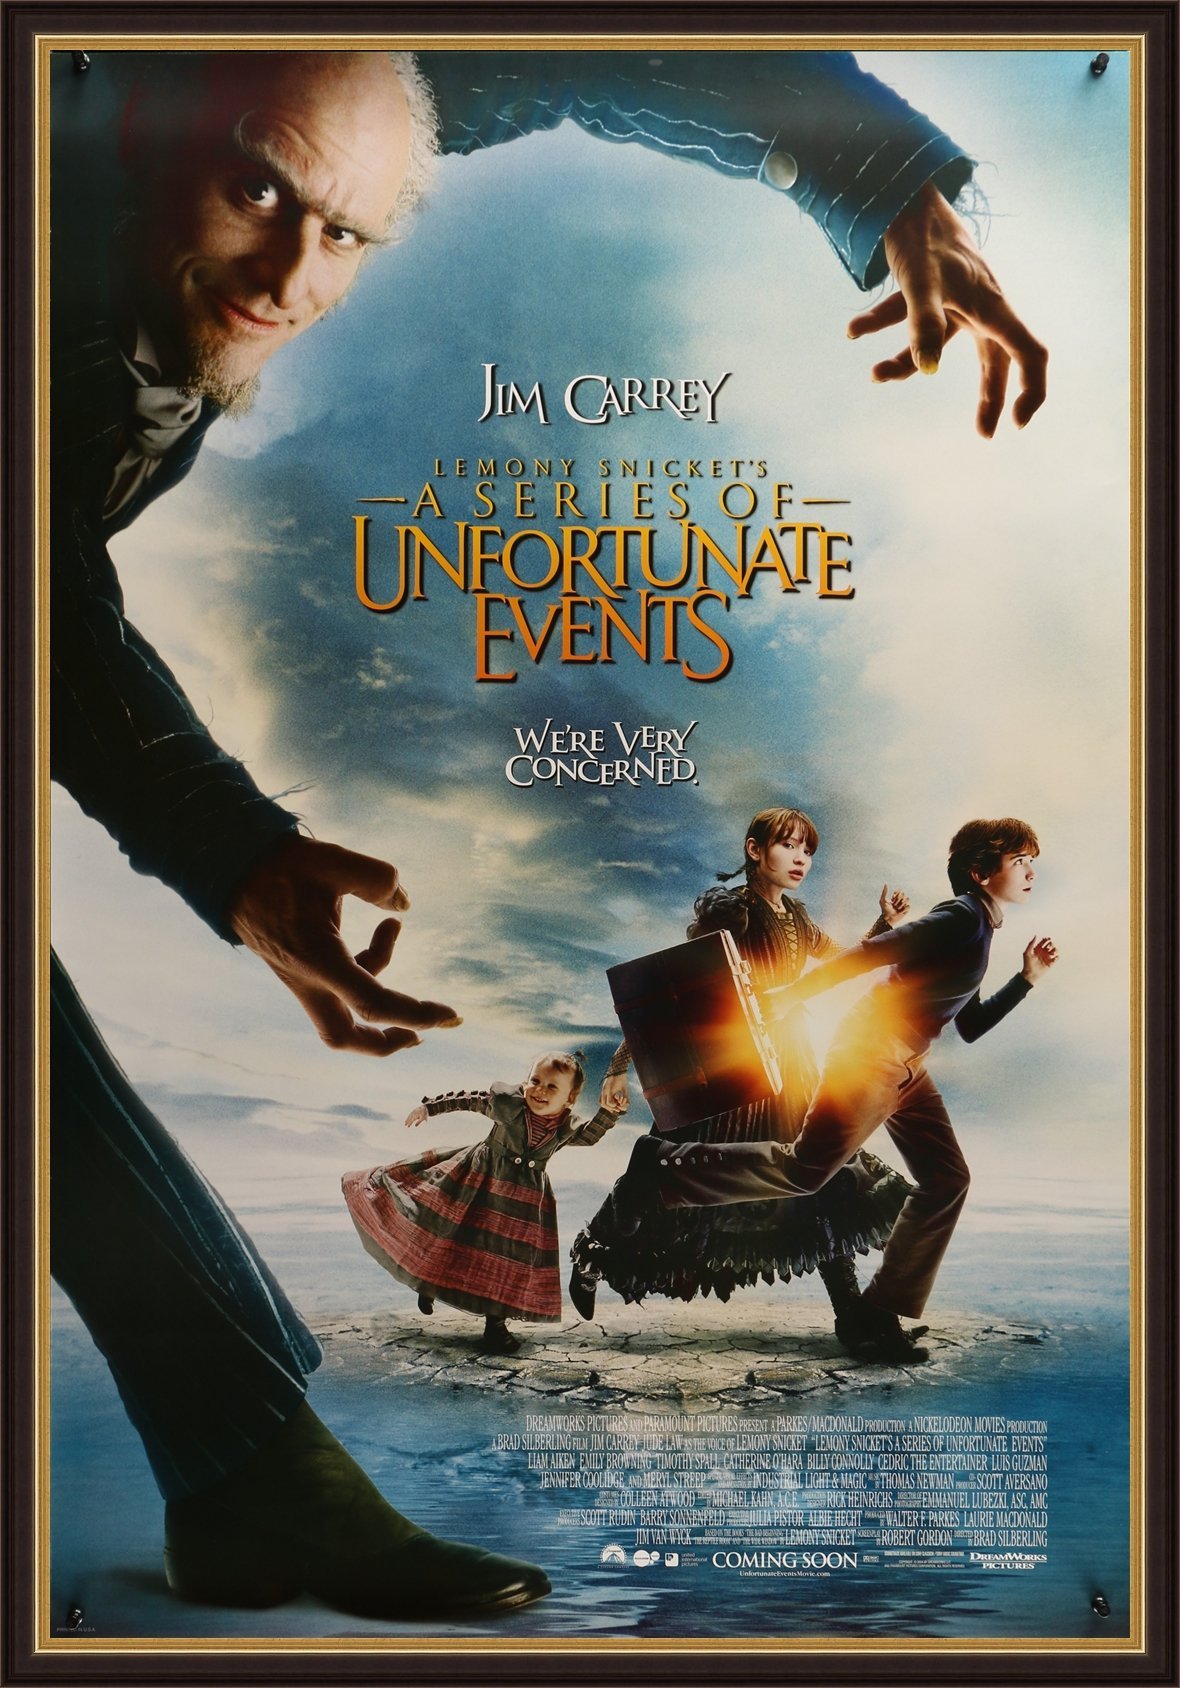 An original movie poster for Lemony Snicket's A Series of Unfortunate Events